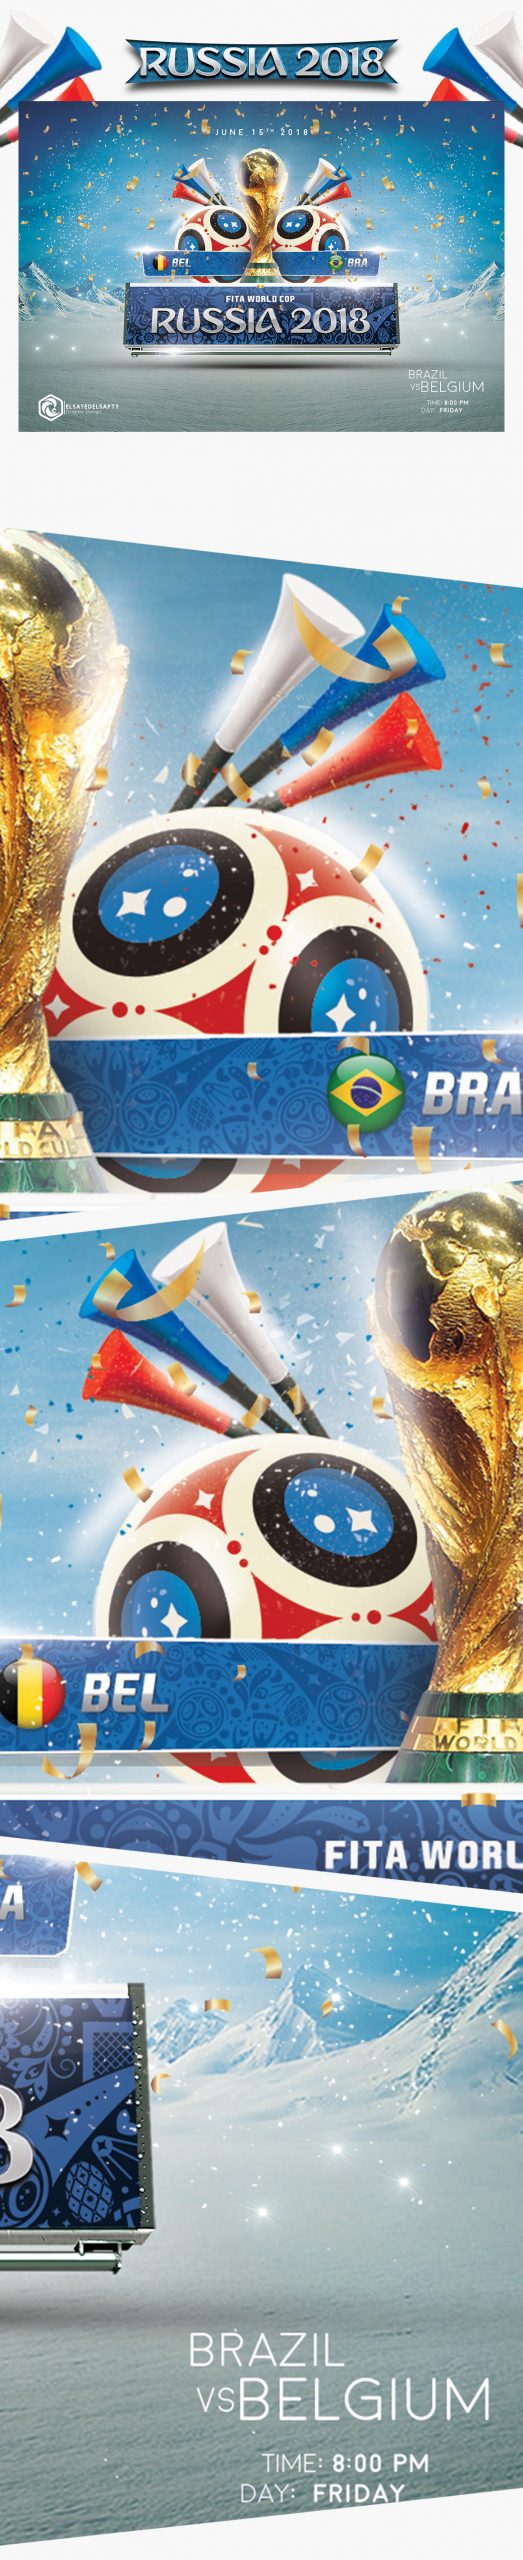 World Cup Russia 2018 Flyer mockup Free Download